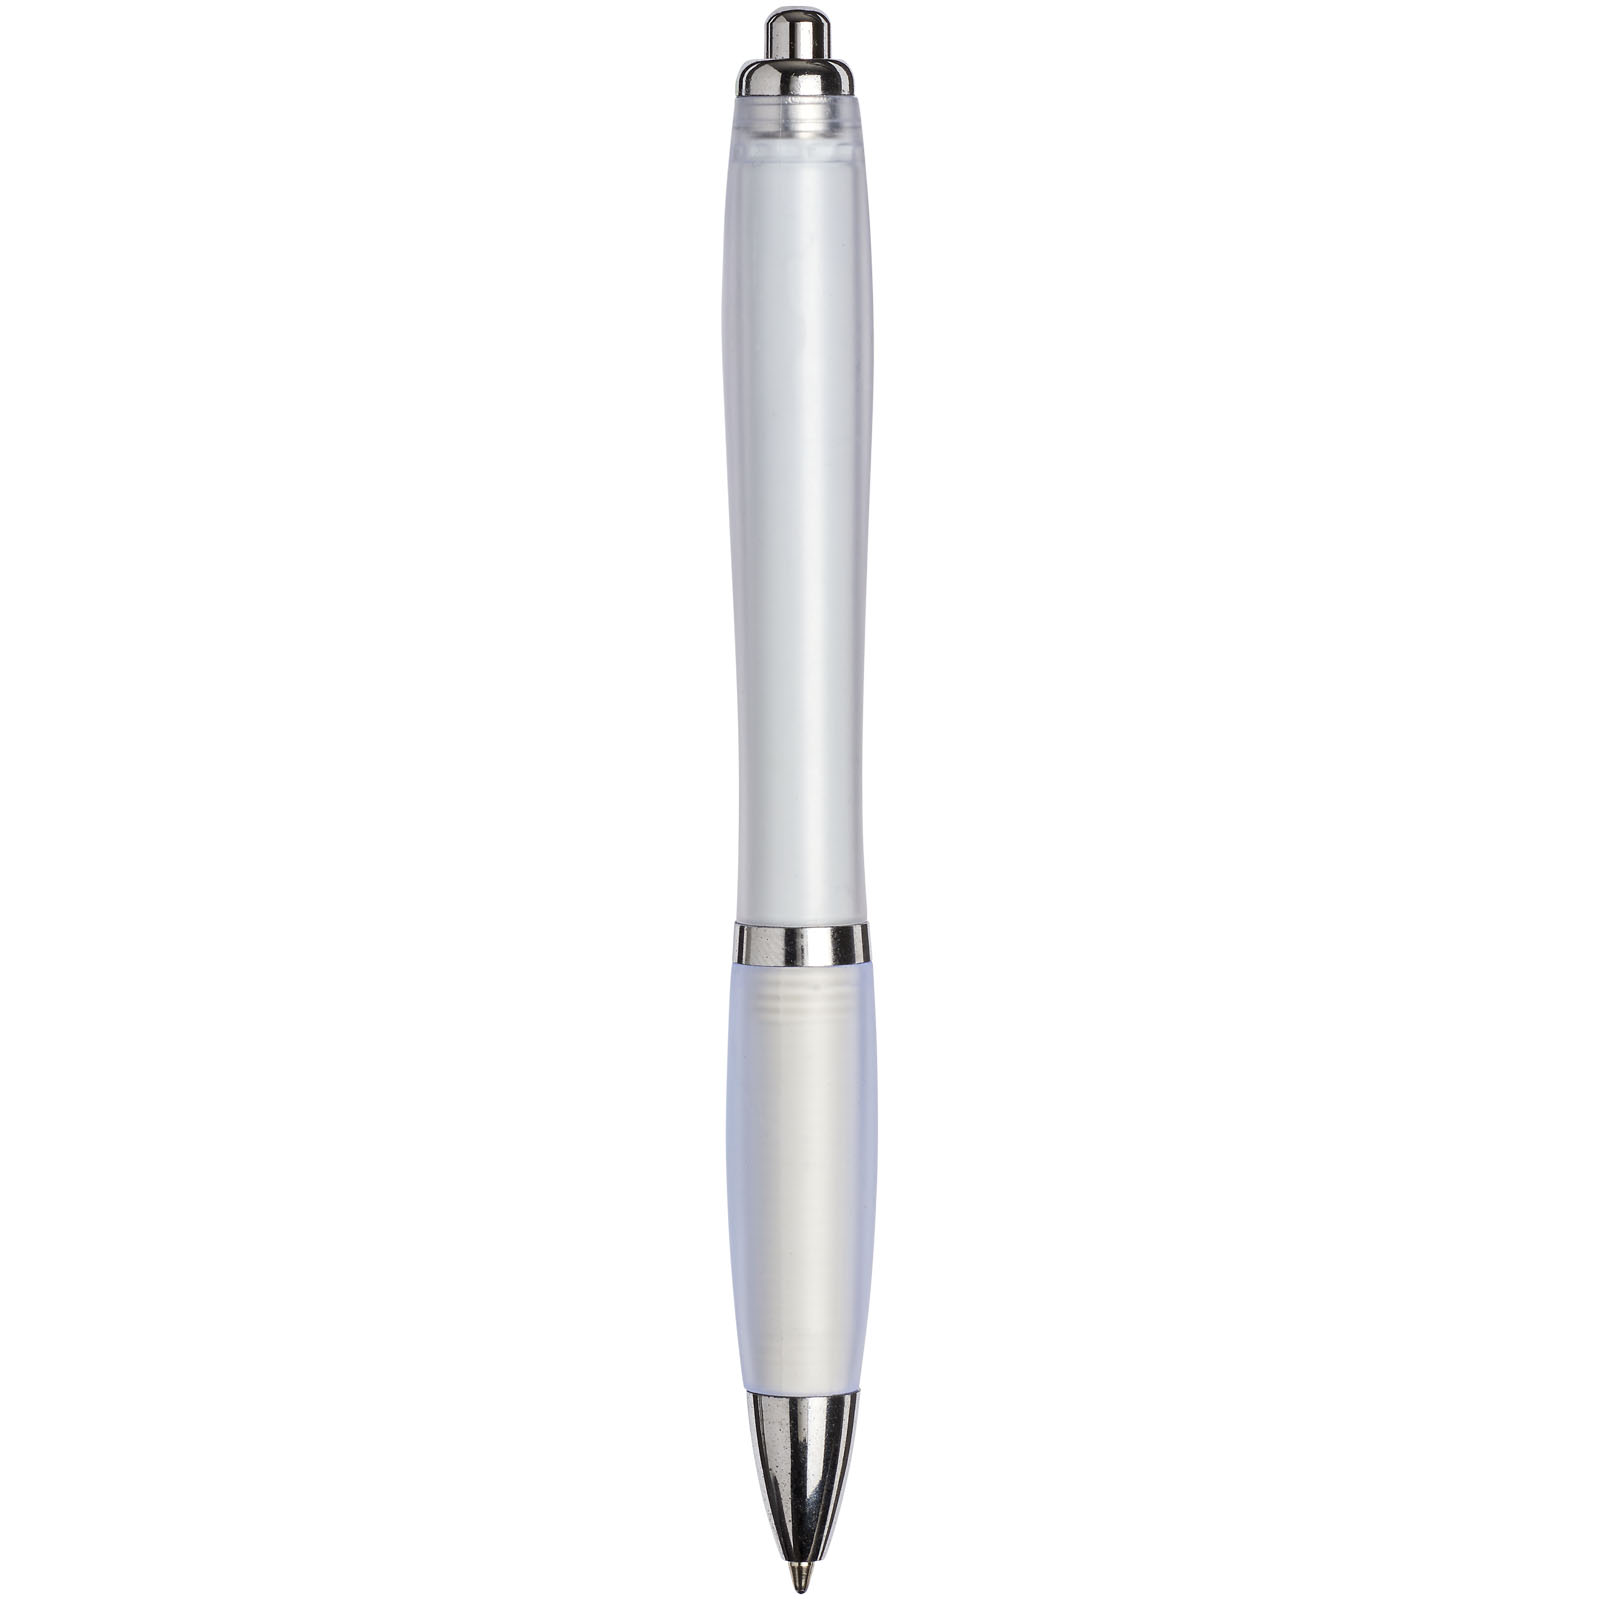 Advertising Ballpoint Pens - Curvy ballpoint pen with frosted barrel and grip - 1